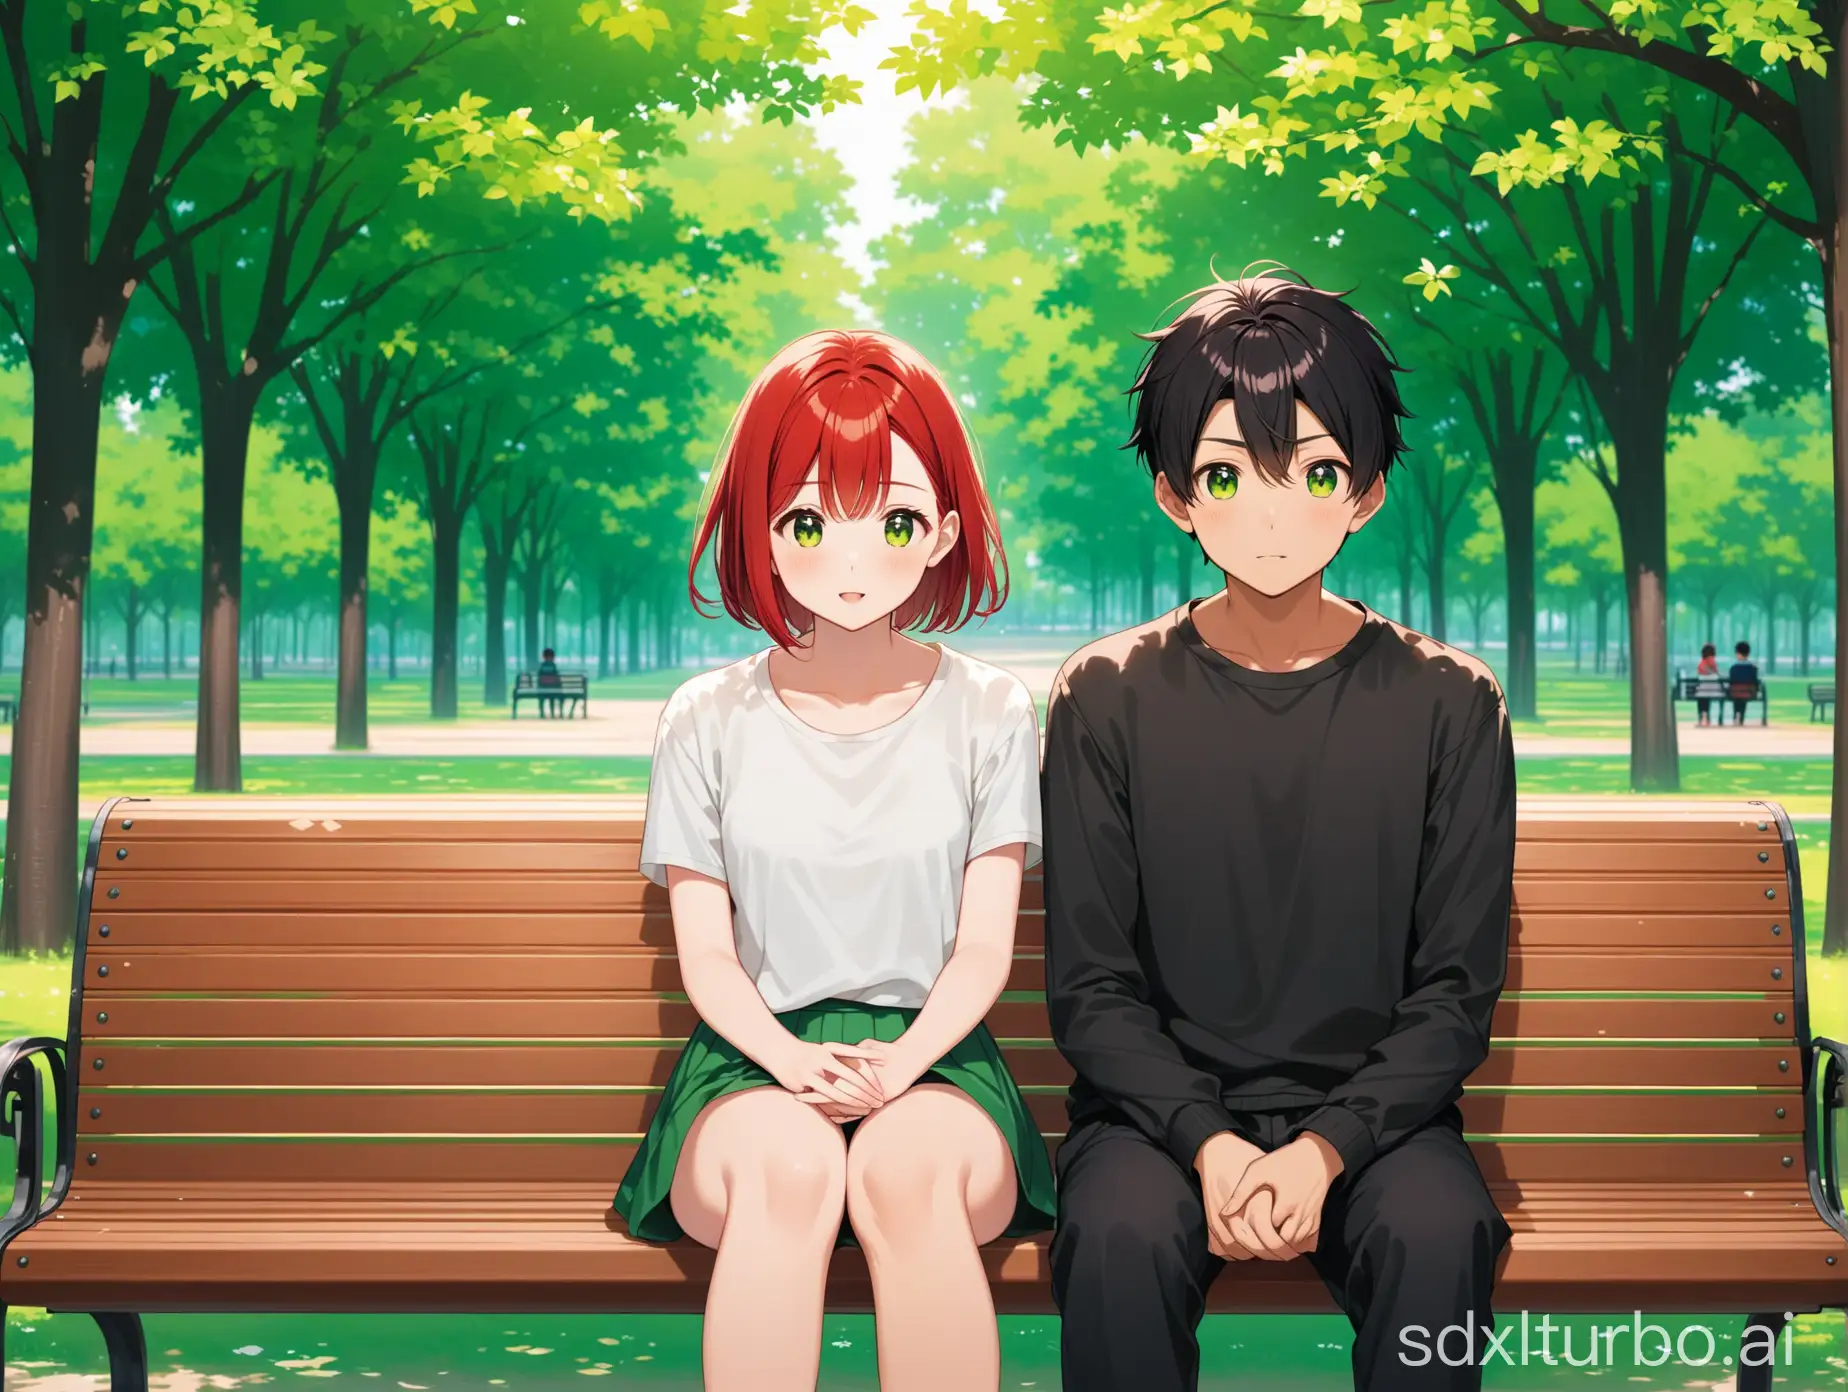 a red-haired boy and a black short-haired girl sitting on a bench in a park with green trees in front view